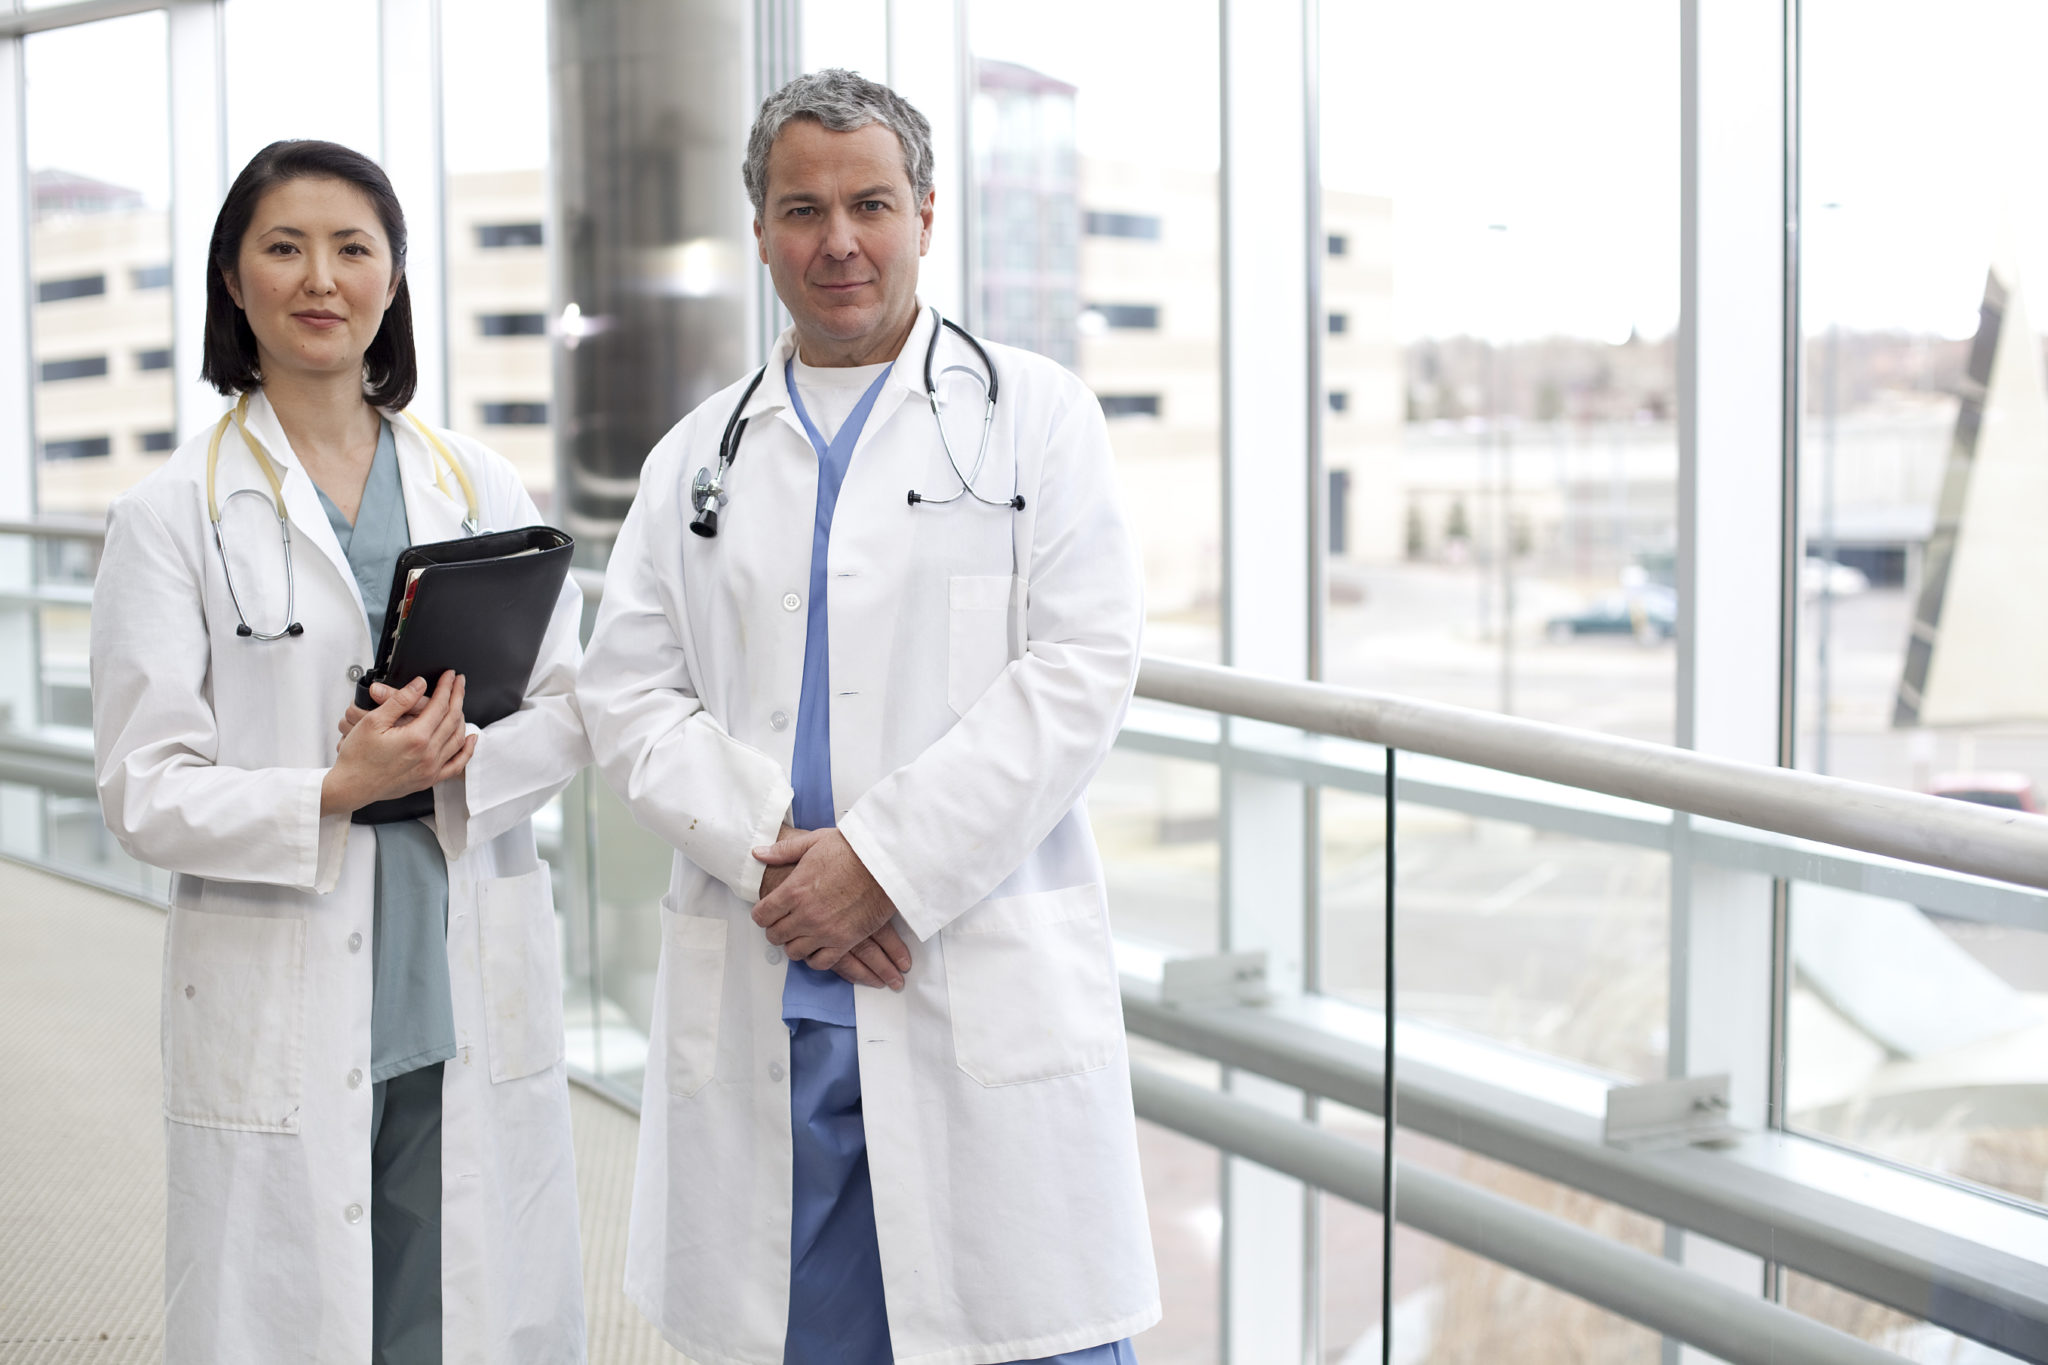 Webinar: How to Build The Right Management Infrastructure for Your Physician Network